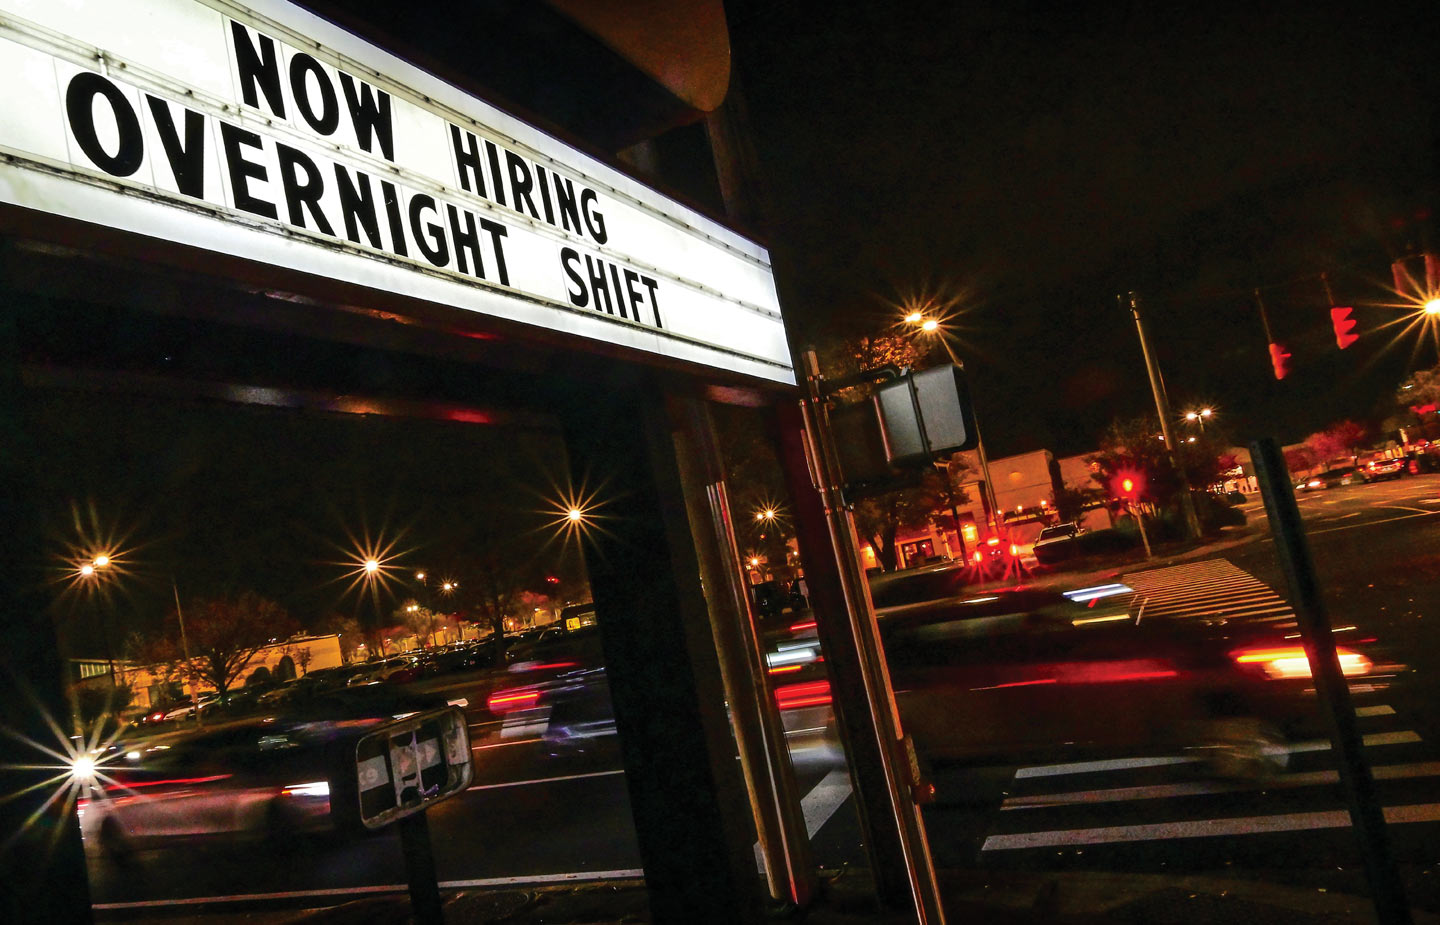 Image of "Now Hiring" sign in business parking lot at night